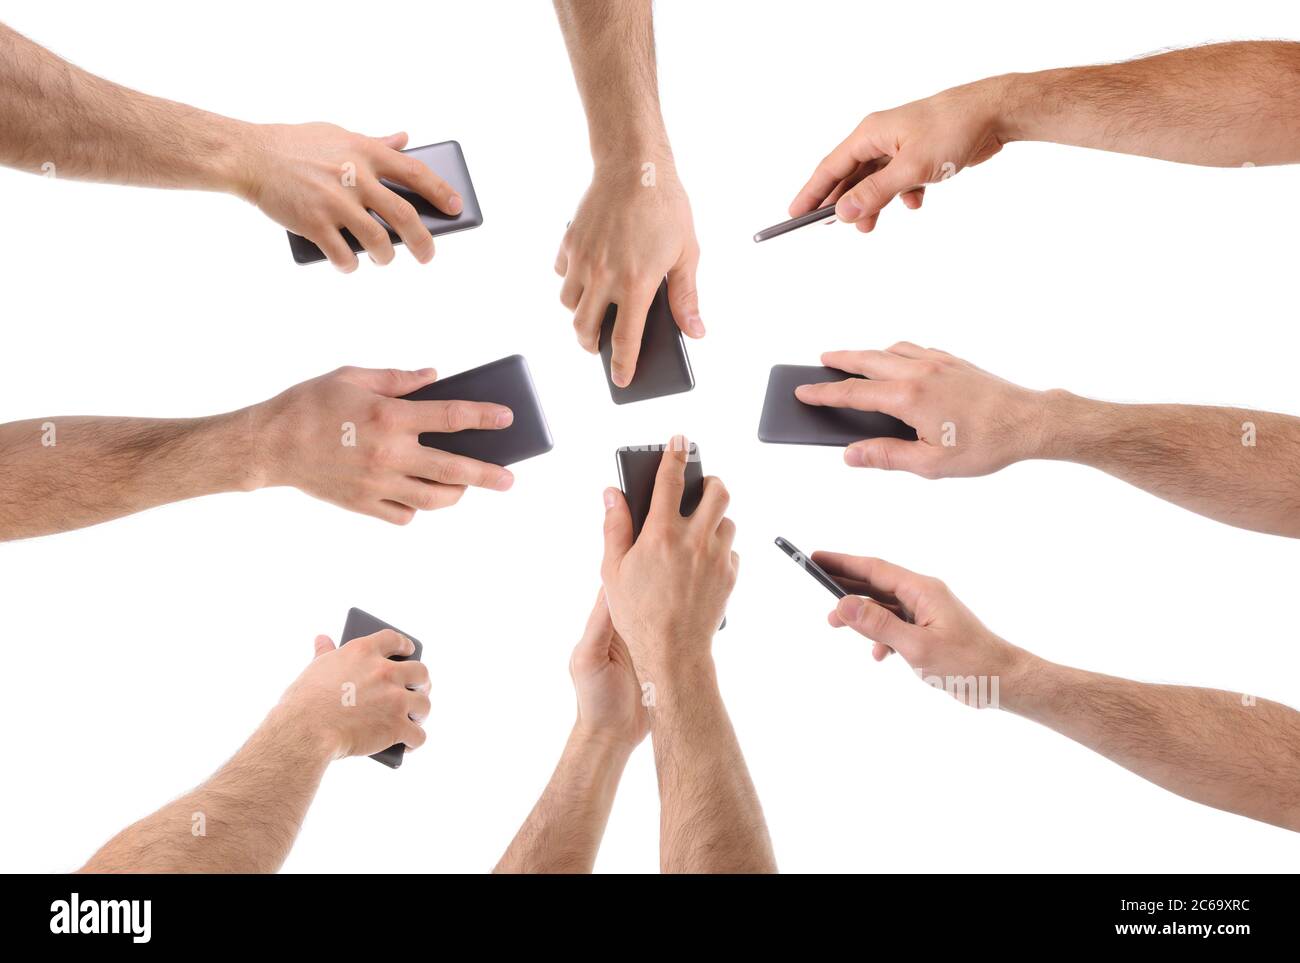 Set of Caucasian male hands with rear views of a gray mobile phone Stock Photo